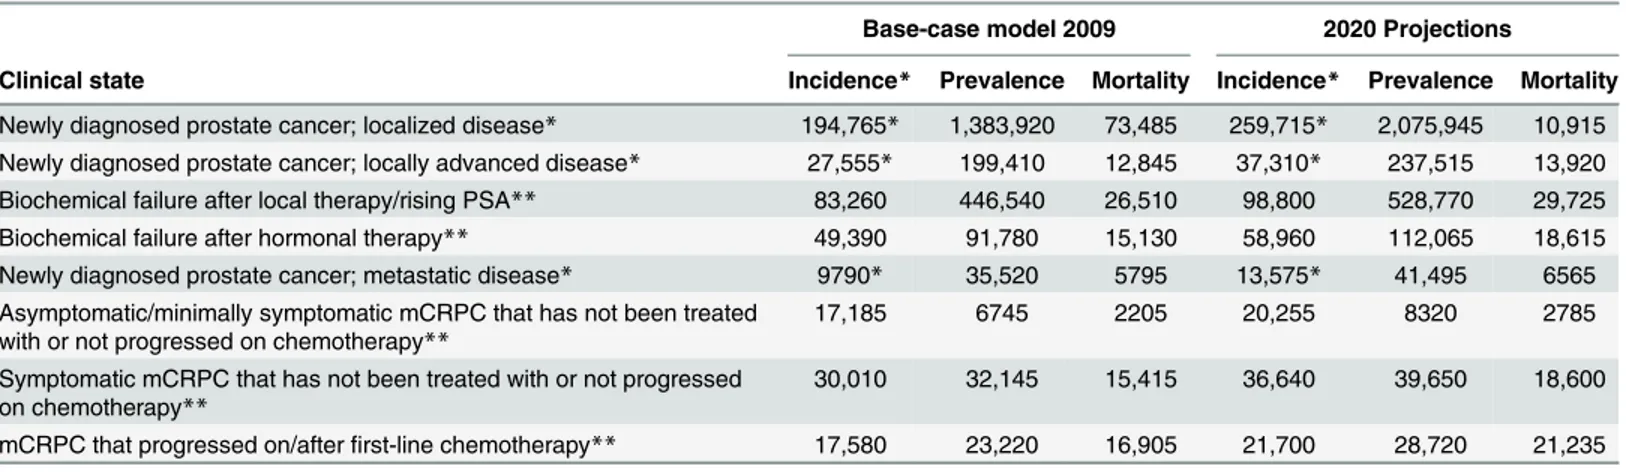 Table 3. Annual progression and mortality rates for the base-case model in 2009 and 2020 projections.